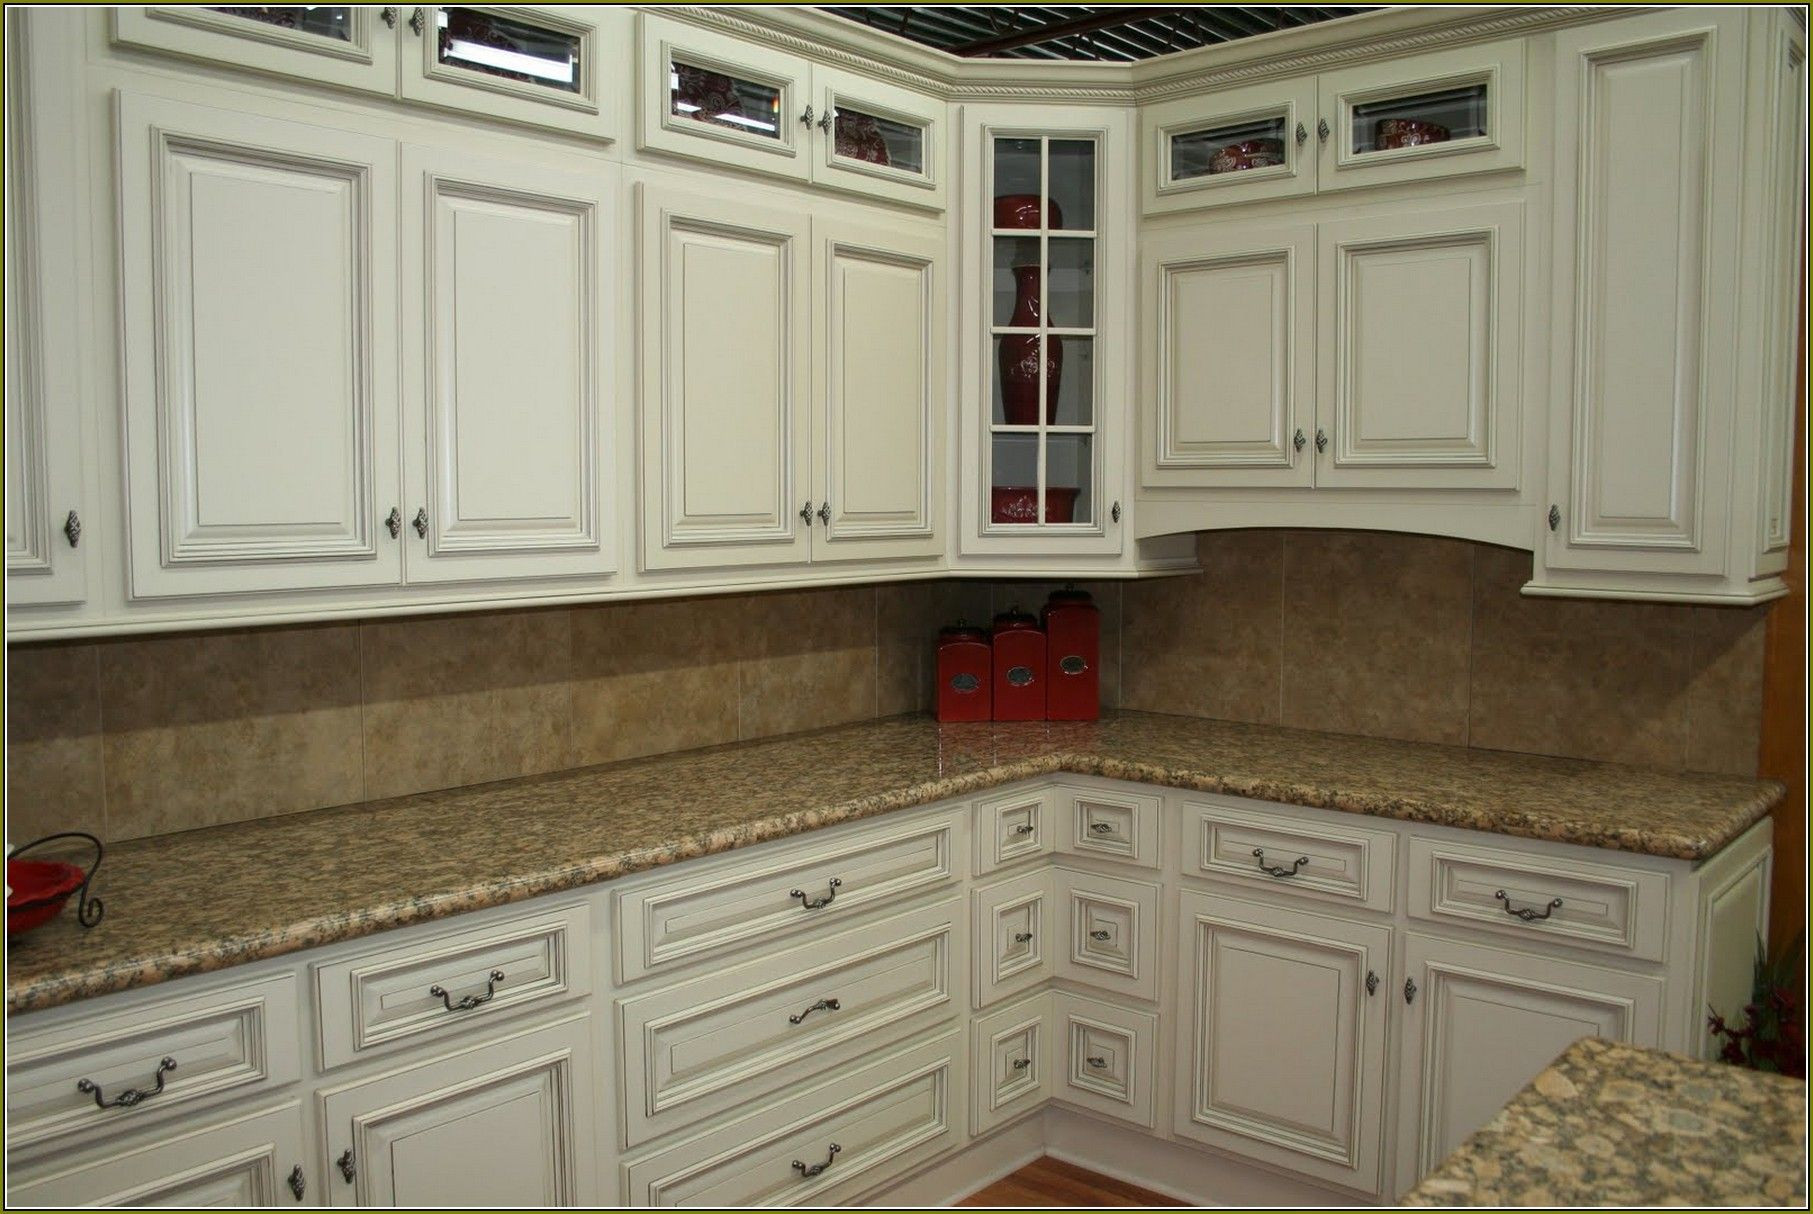 Kitchen Cabinets Doors Home Depot
 Awesome Home Depot Kitchen Cabinets Door Handles